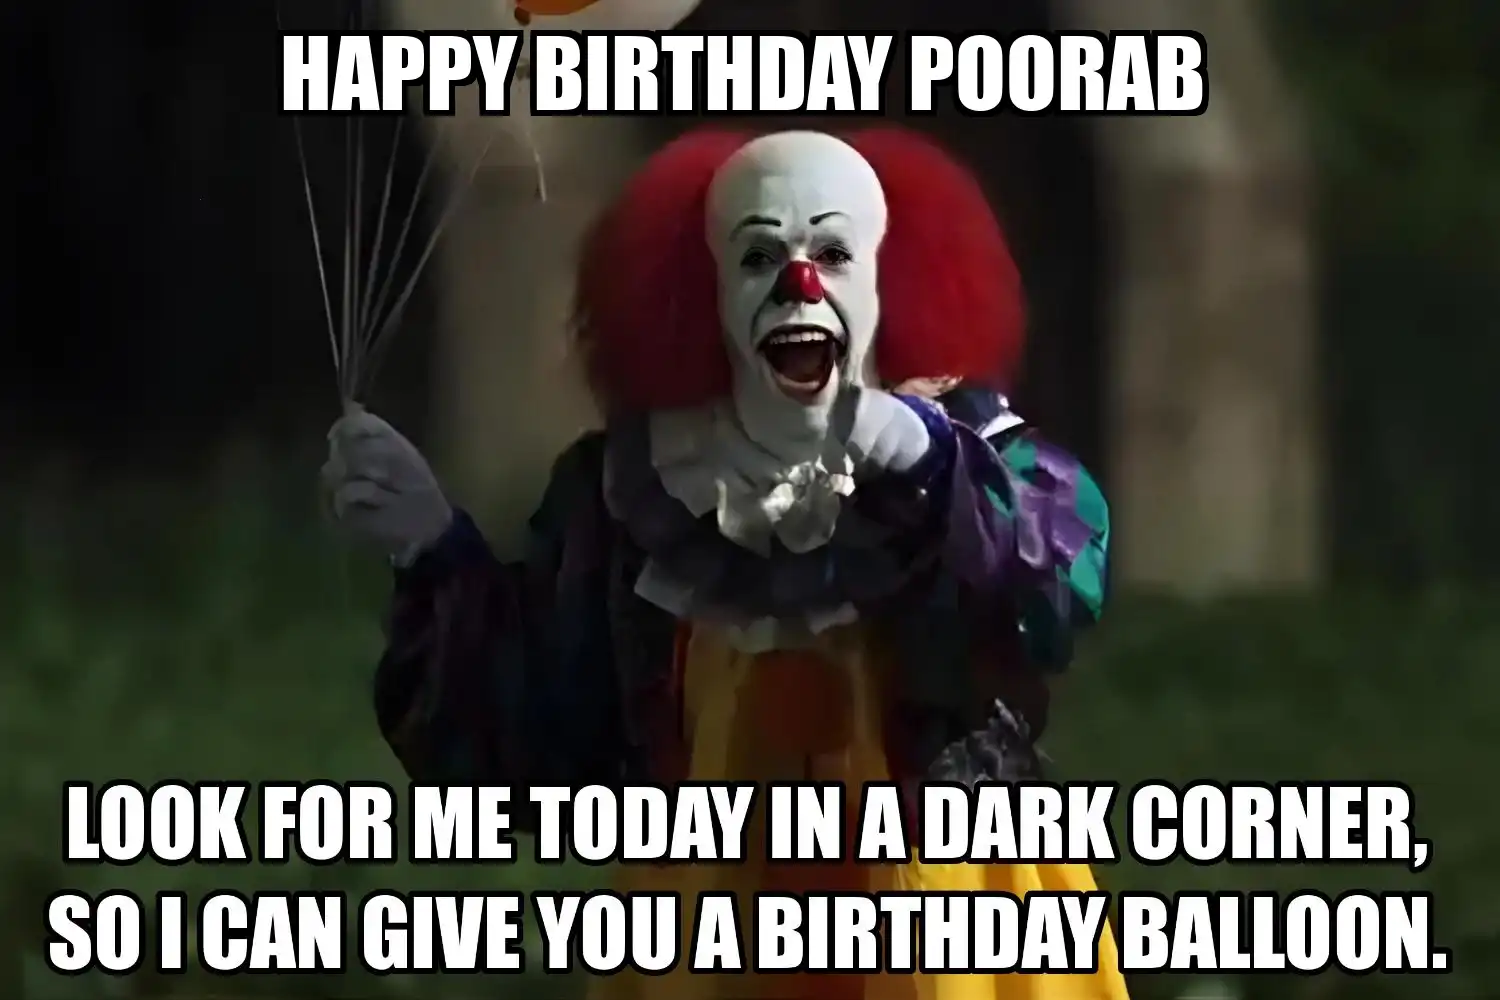 Happy Birthday Poorab I Can Give You A Balloon Meme